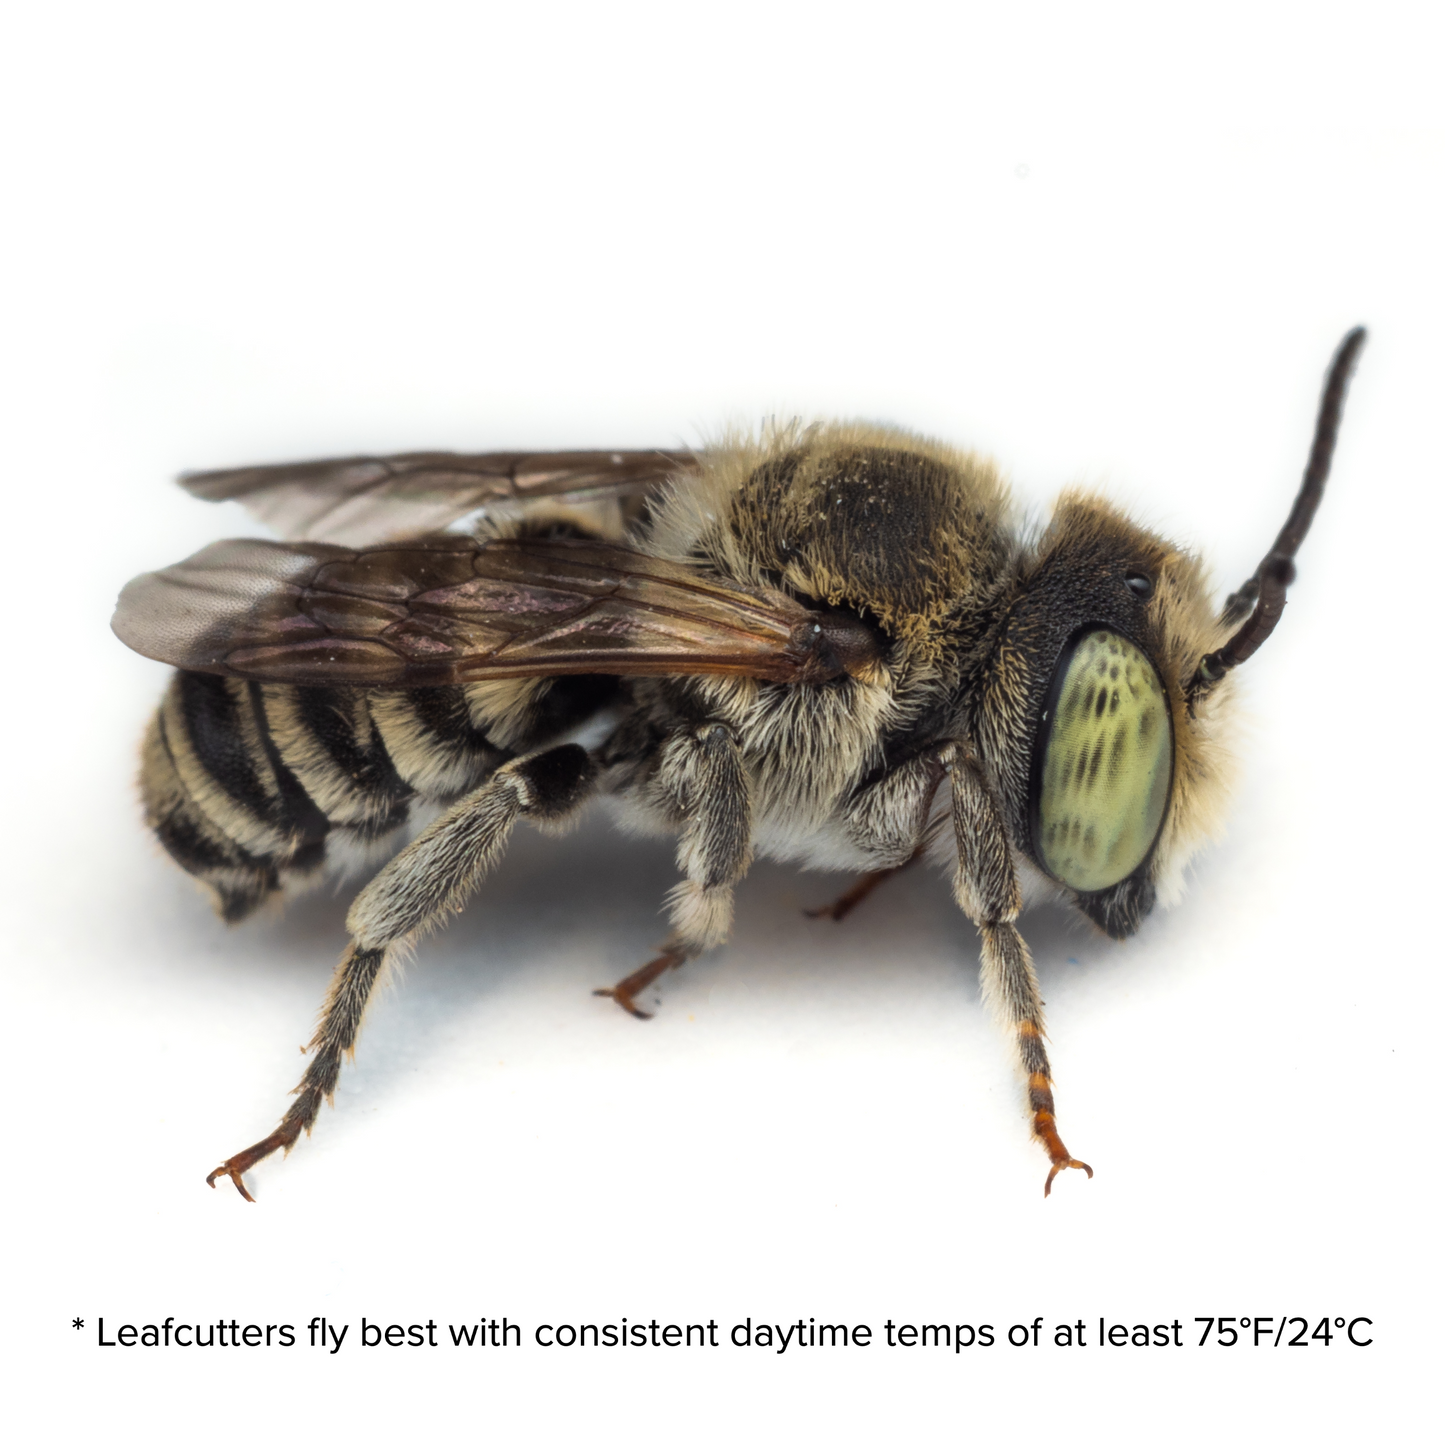 Leafcutter bee example with yellow body and distinctive green eyes